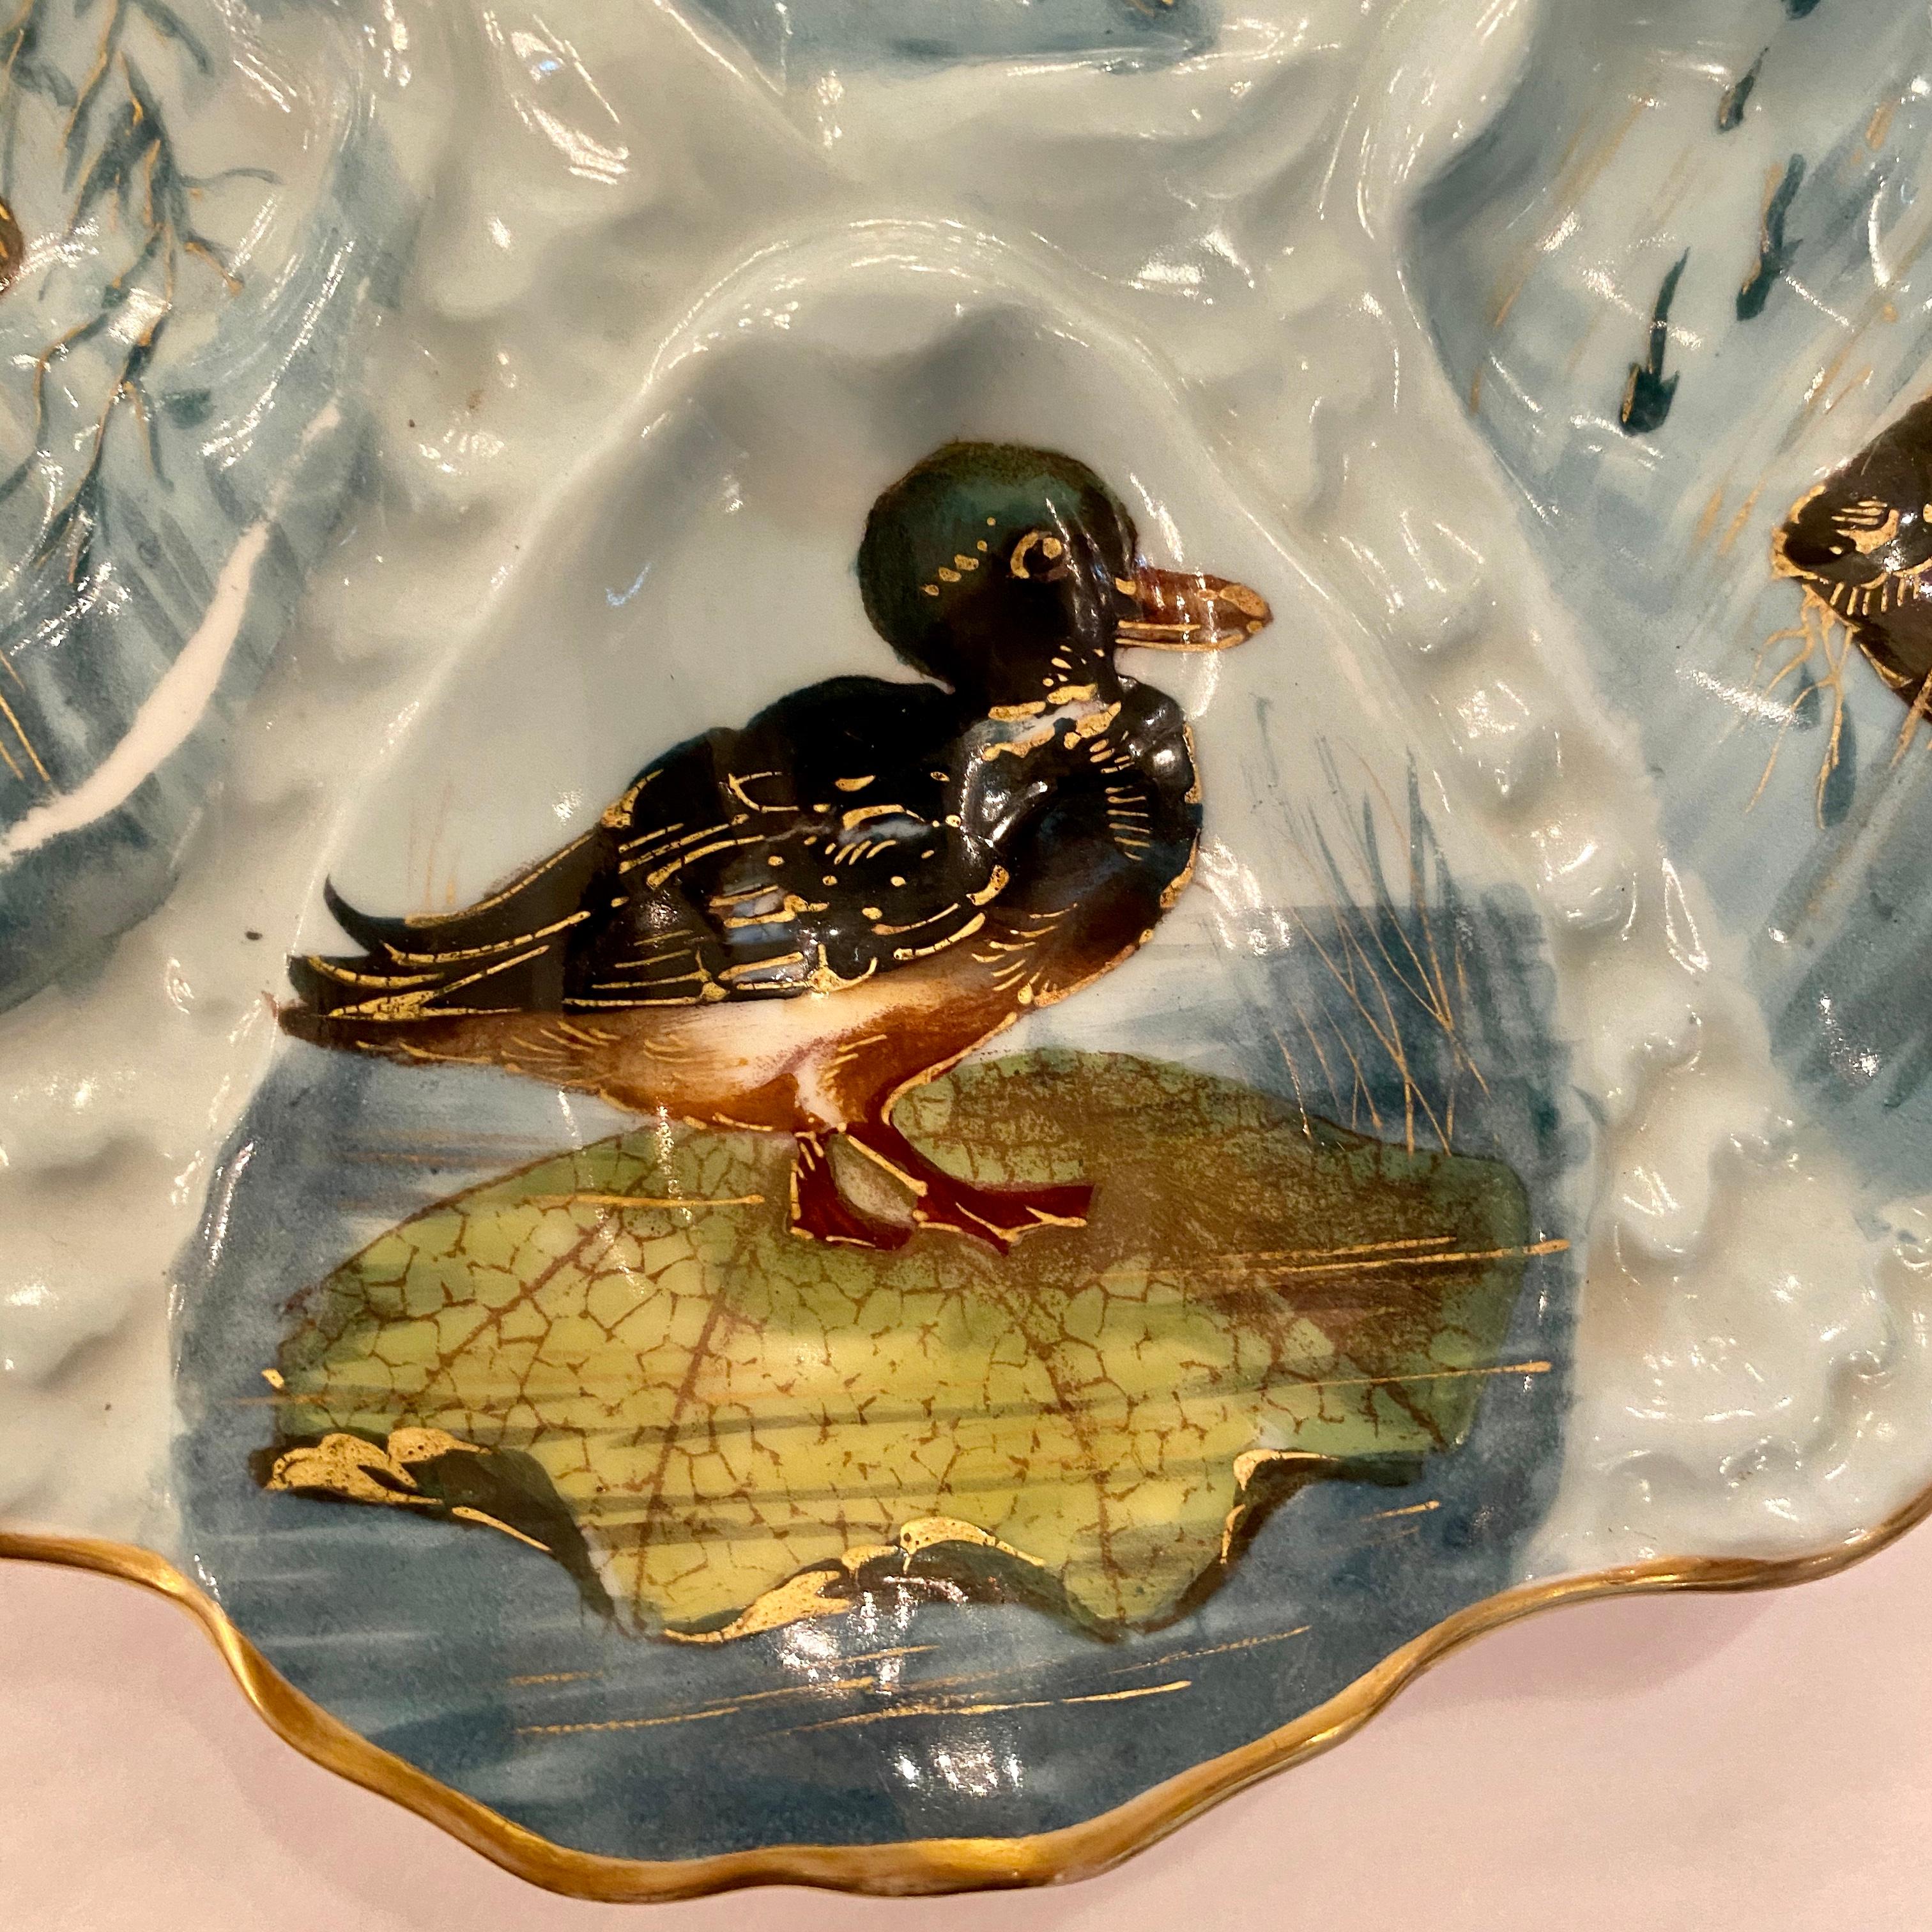 Antique French Limoges porcelain oyster plate with hand painted sea life, circa 1870-1880.
We currently have a coordinating pair of these, each listed and sold individually.